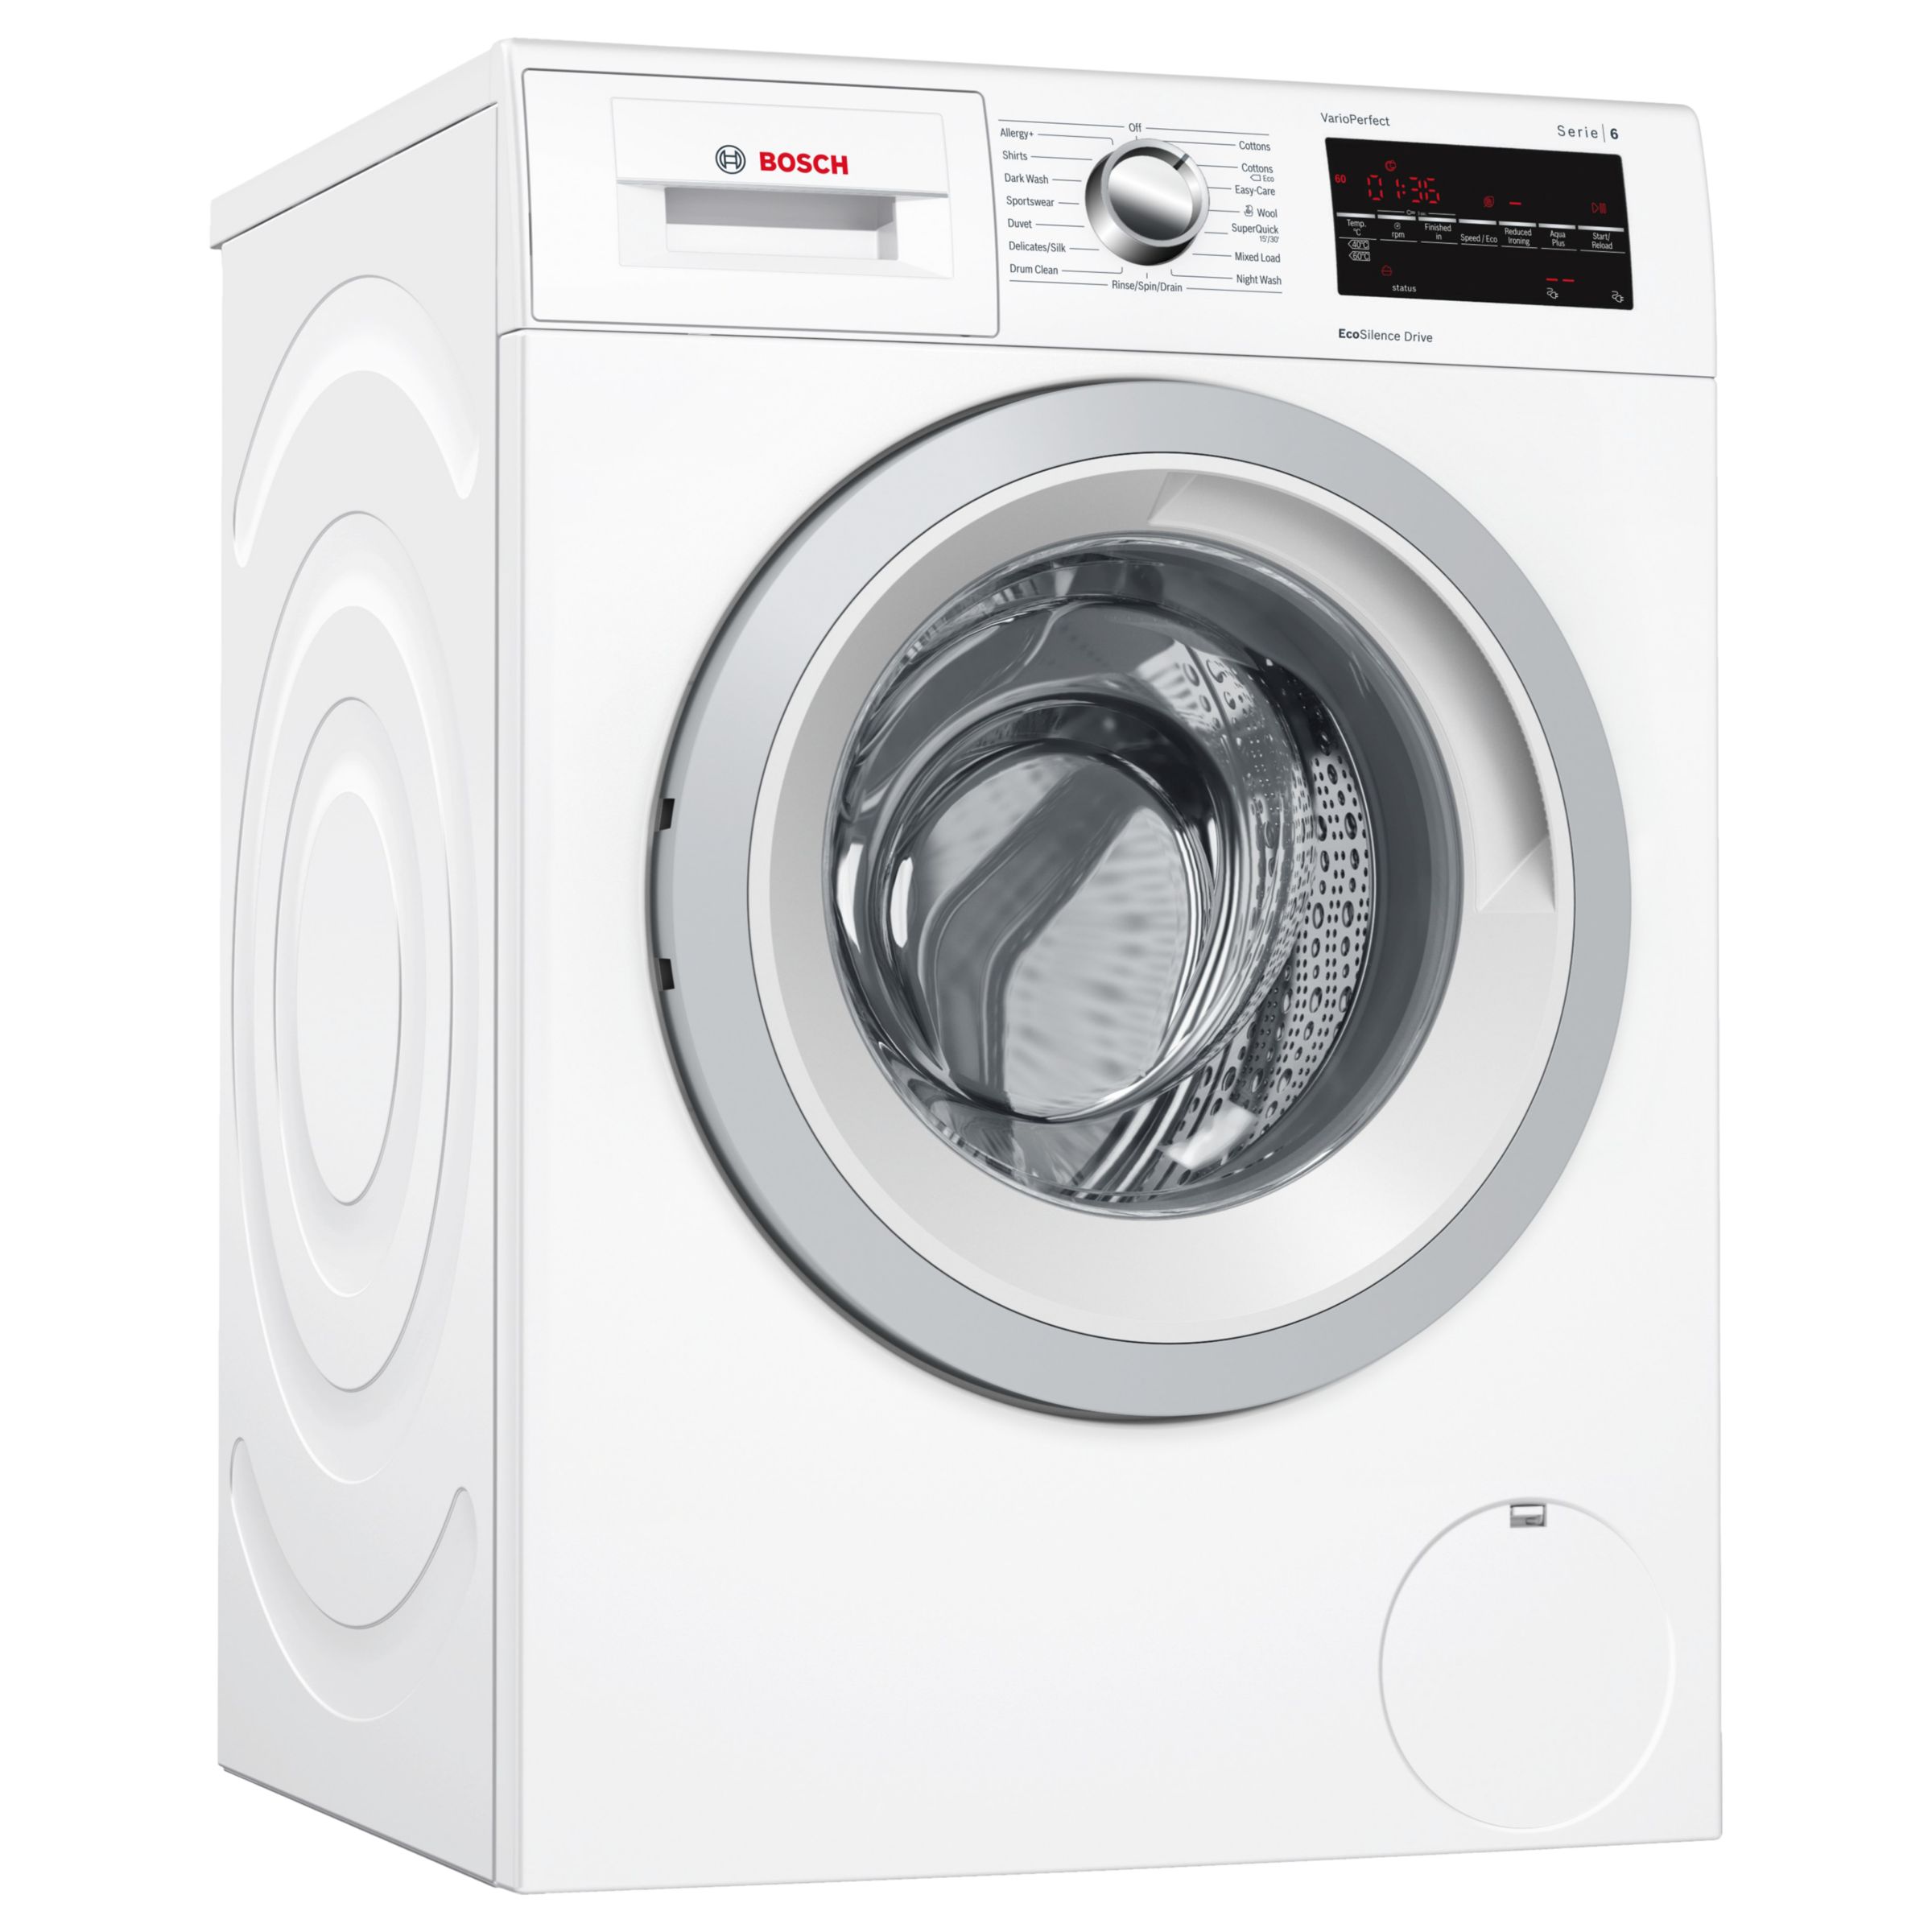 Bosch WAT28421GB Freestanding Washing Machine, 8kg Load, A+++ Energy Rating, 1400rpm Spin, White